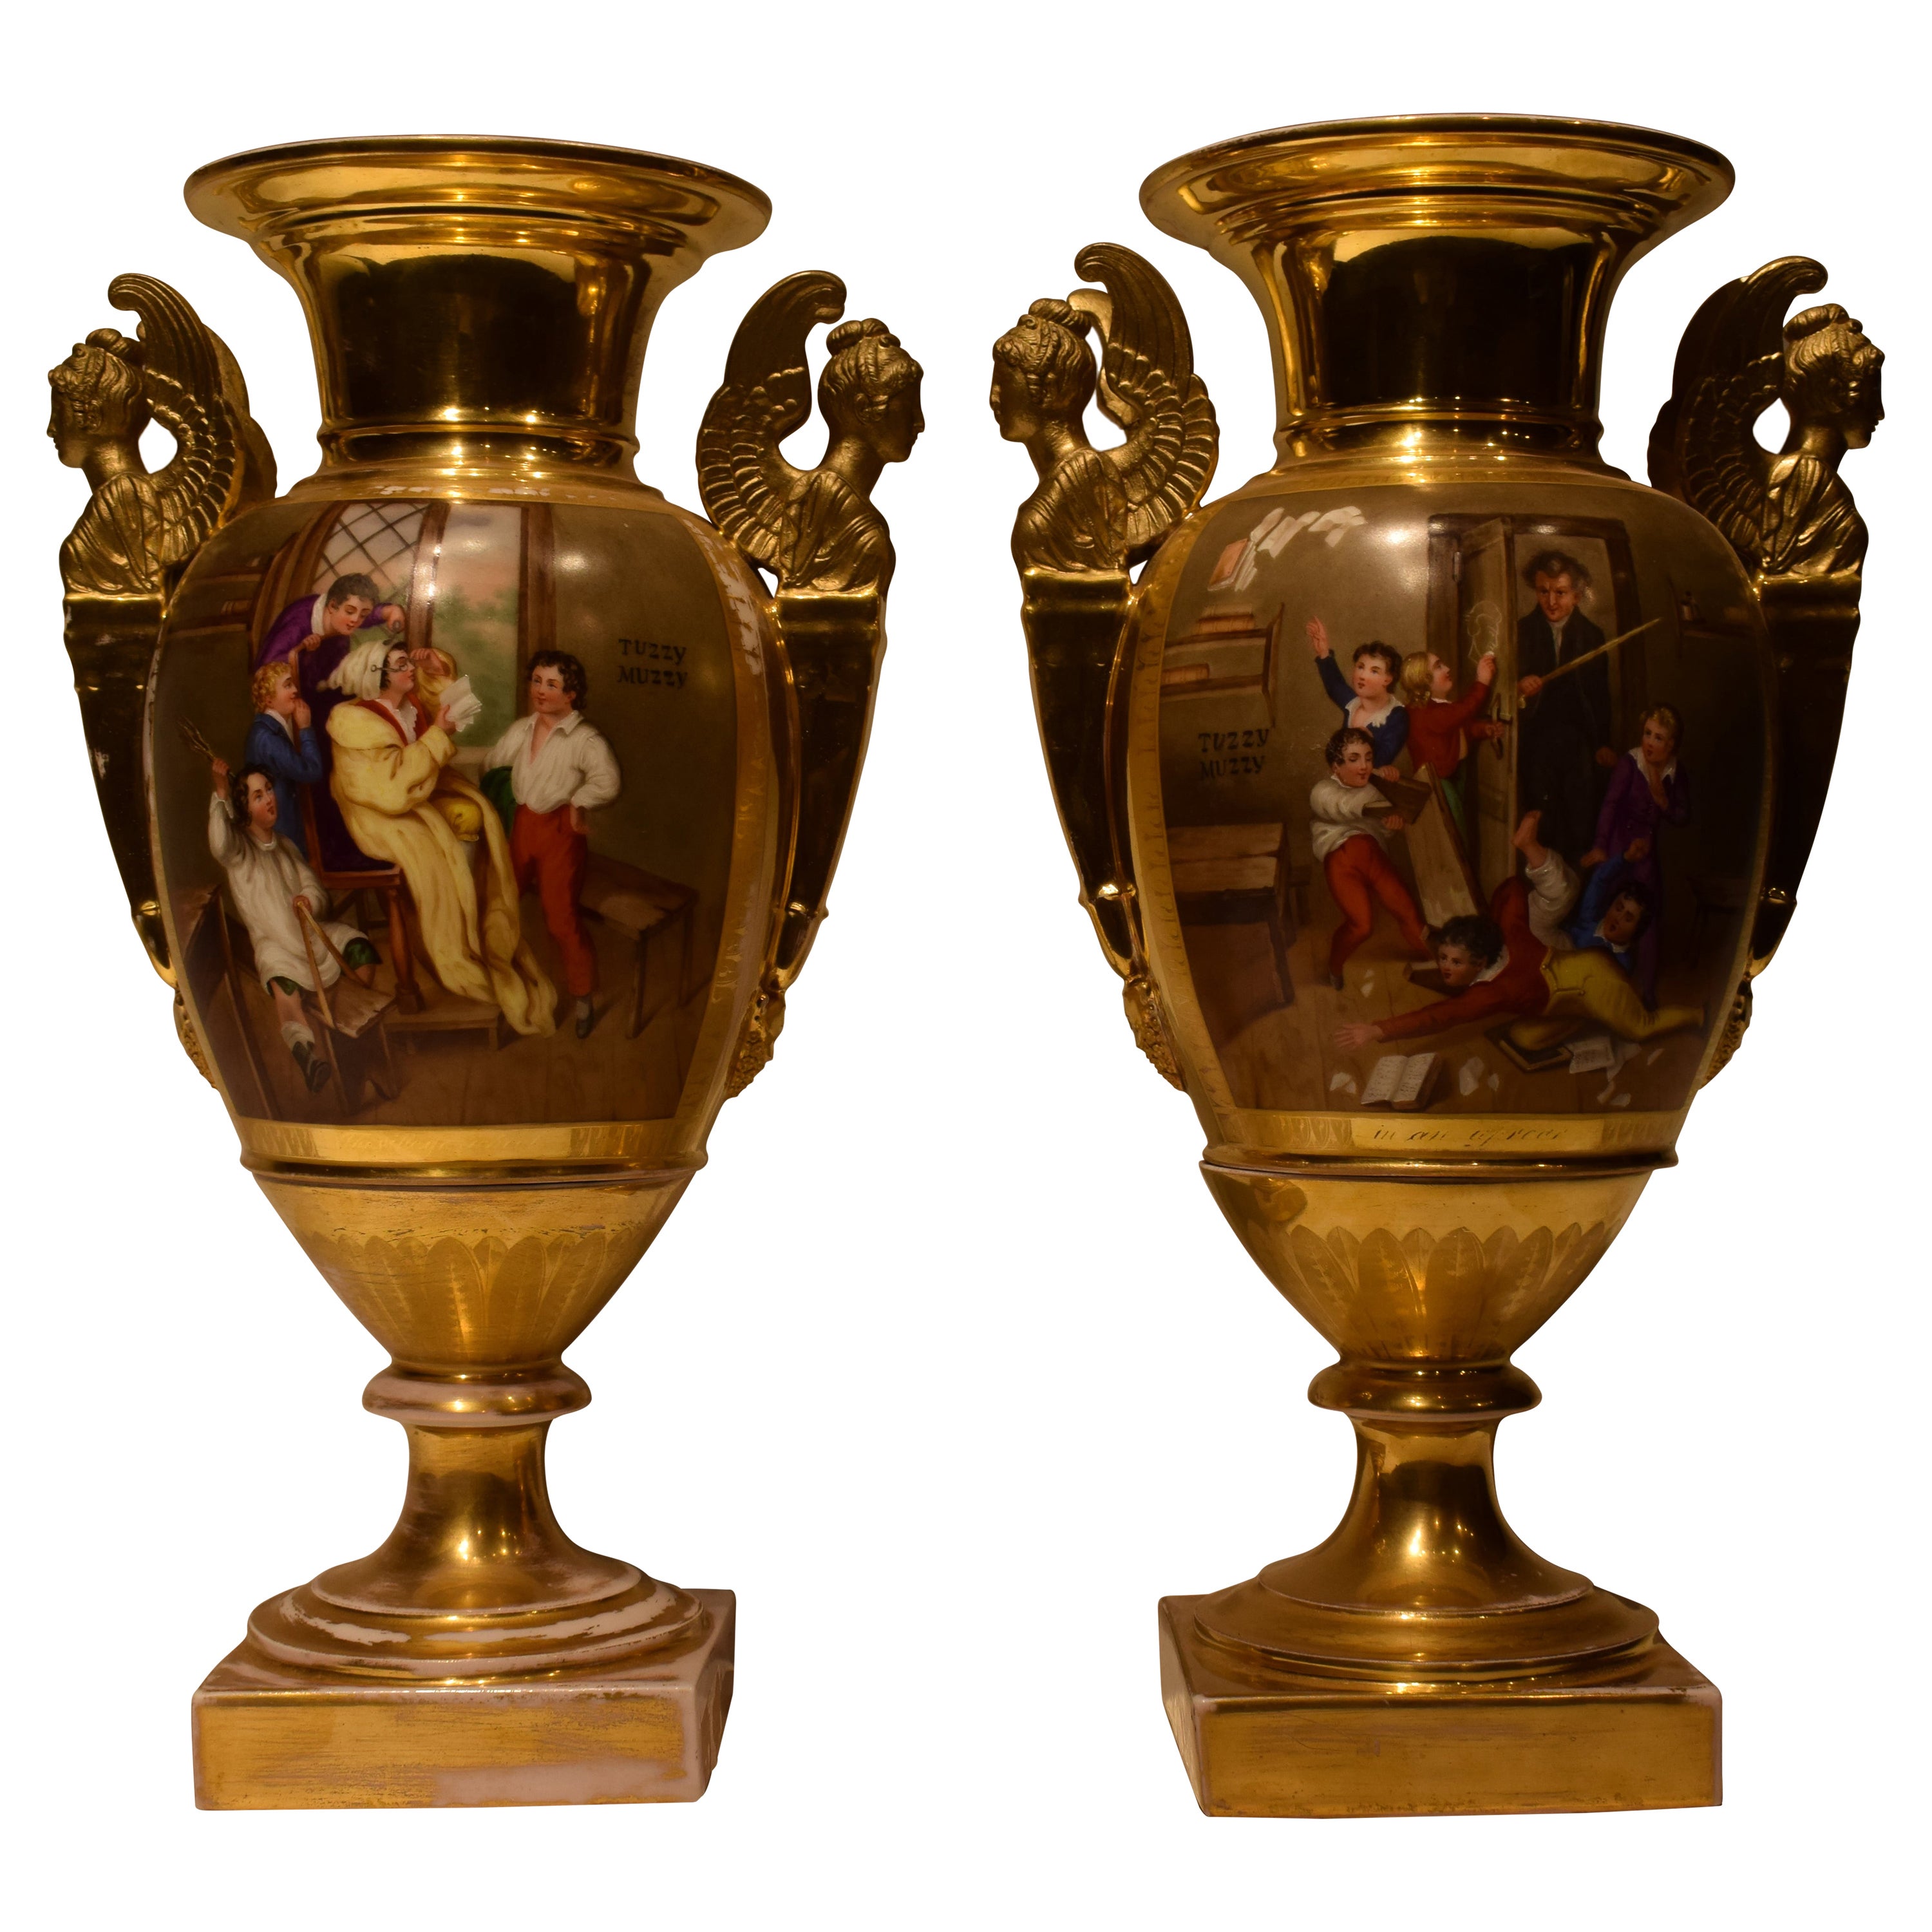 A fine Pair of Old Paris vases. Hand Painted Decoration depicting Children in mischief. Original gilding. France, circa 1860.
Dimensions: Height 17